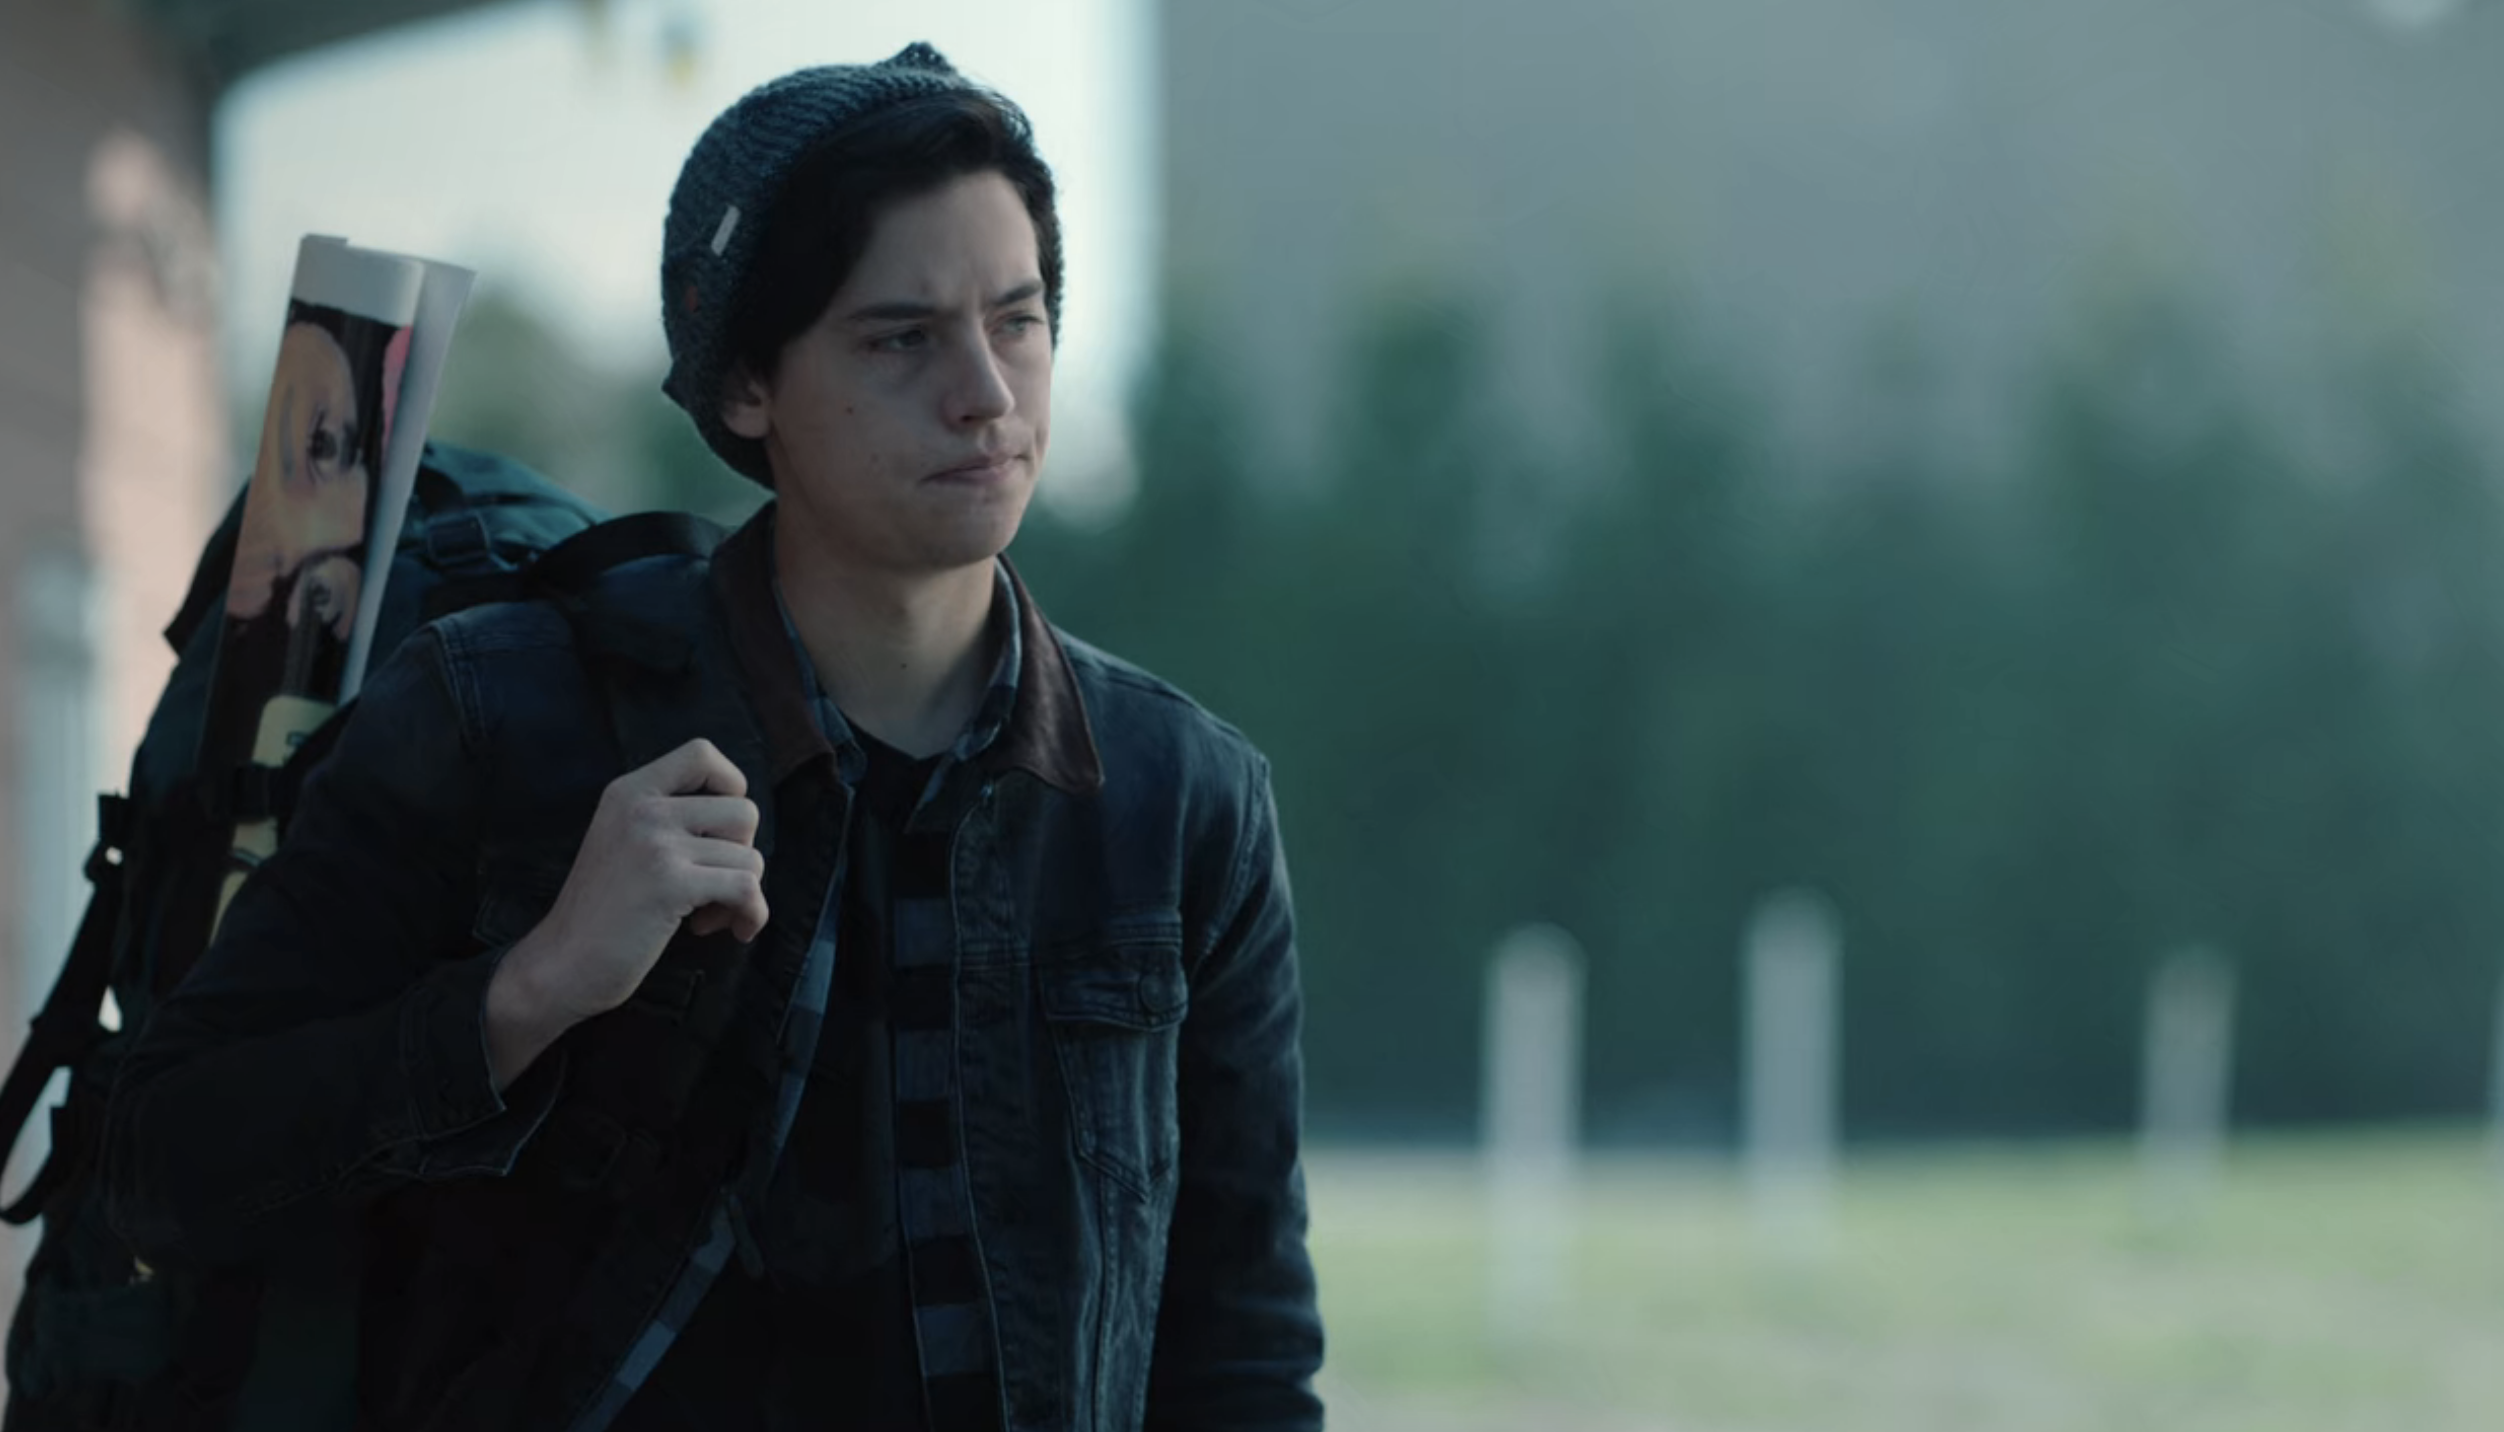 Screenshot from &quot;Riverdale&quot; of a person standing alone and wearing a backpack